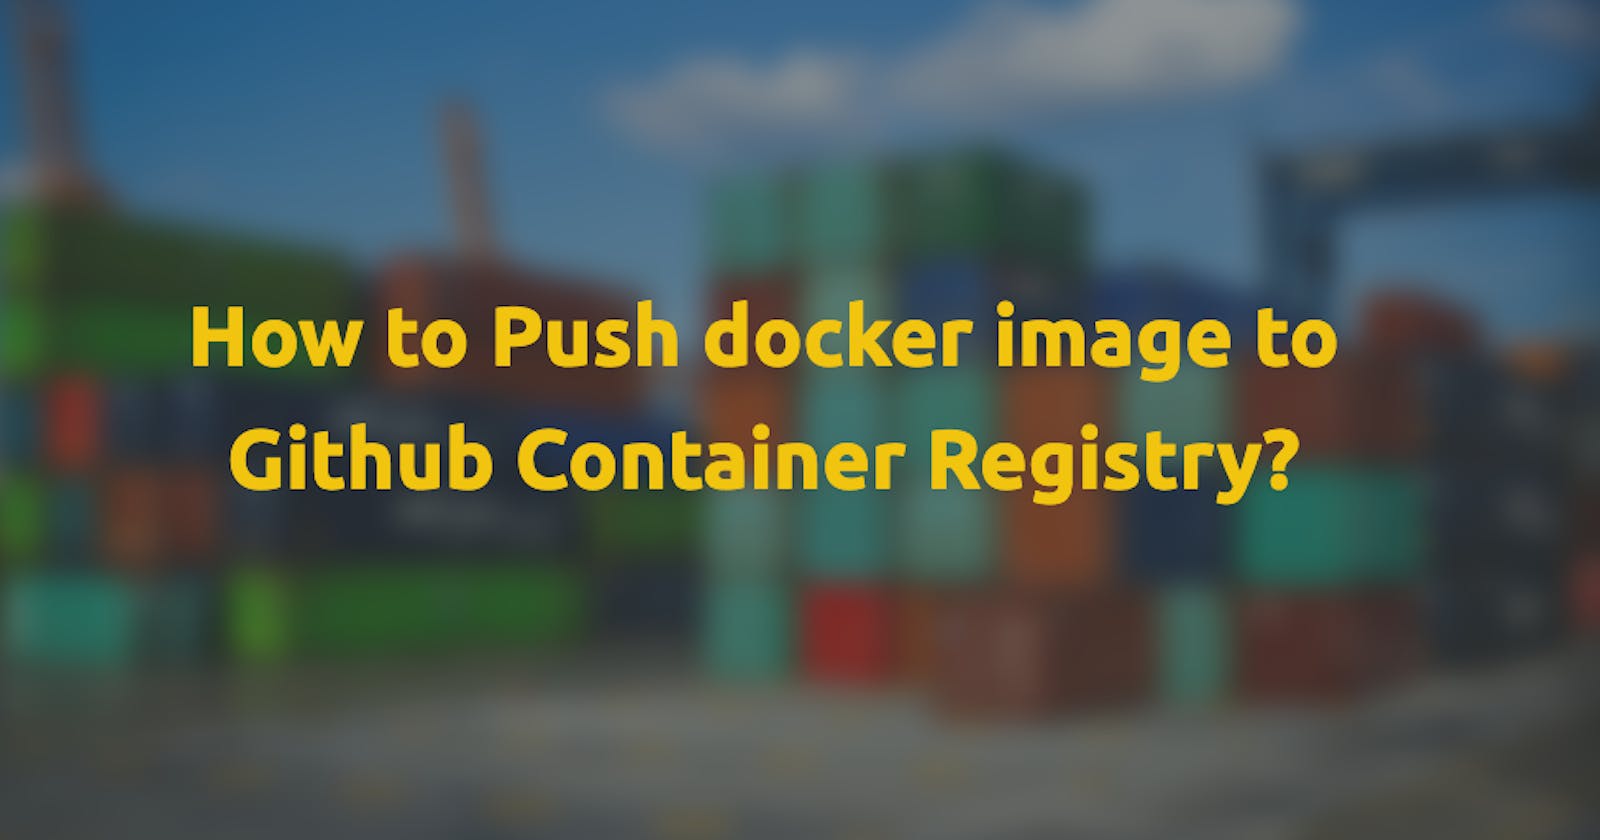 How to Push docker image to Github Container Registry?